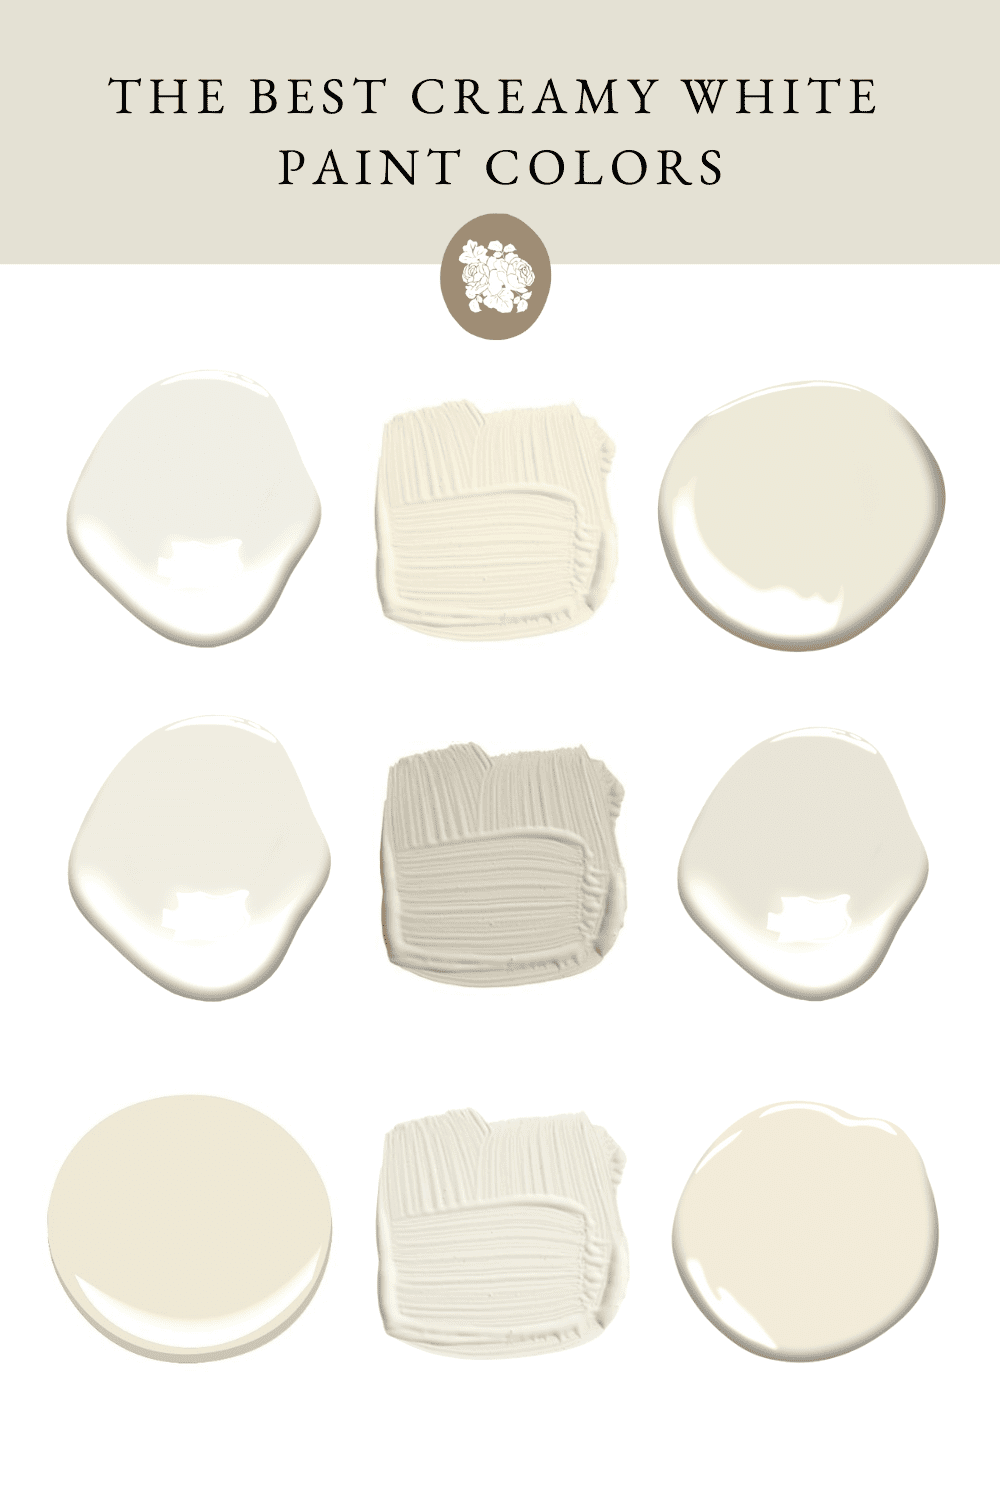 THE-BEST-WARM-CREAMY-WHITE-PAINT-COLORS